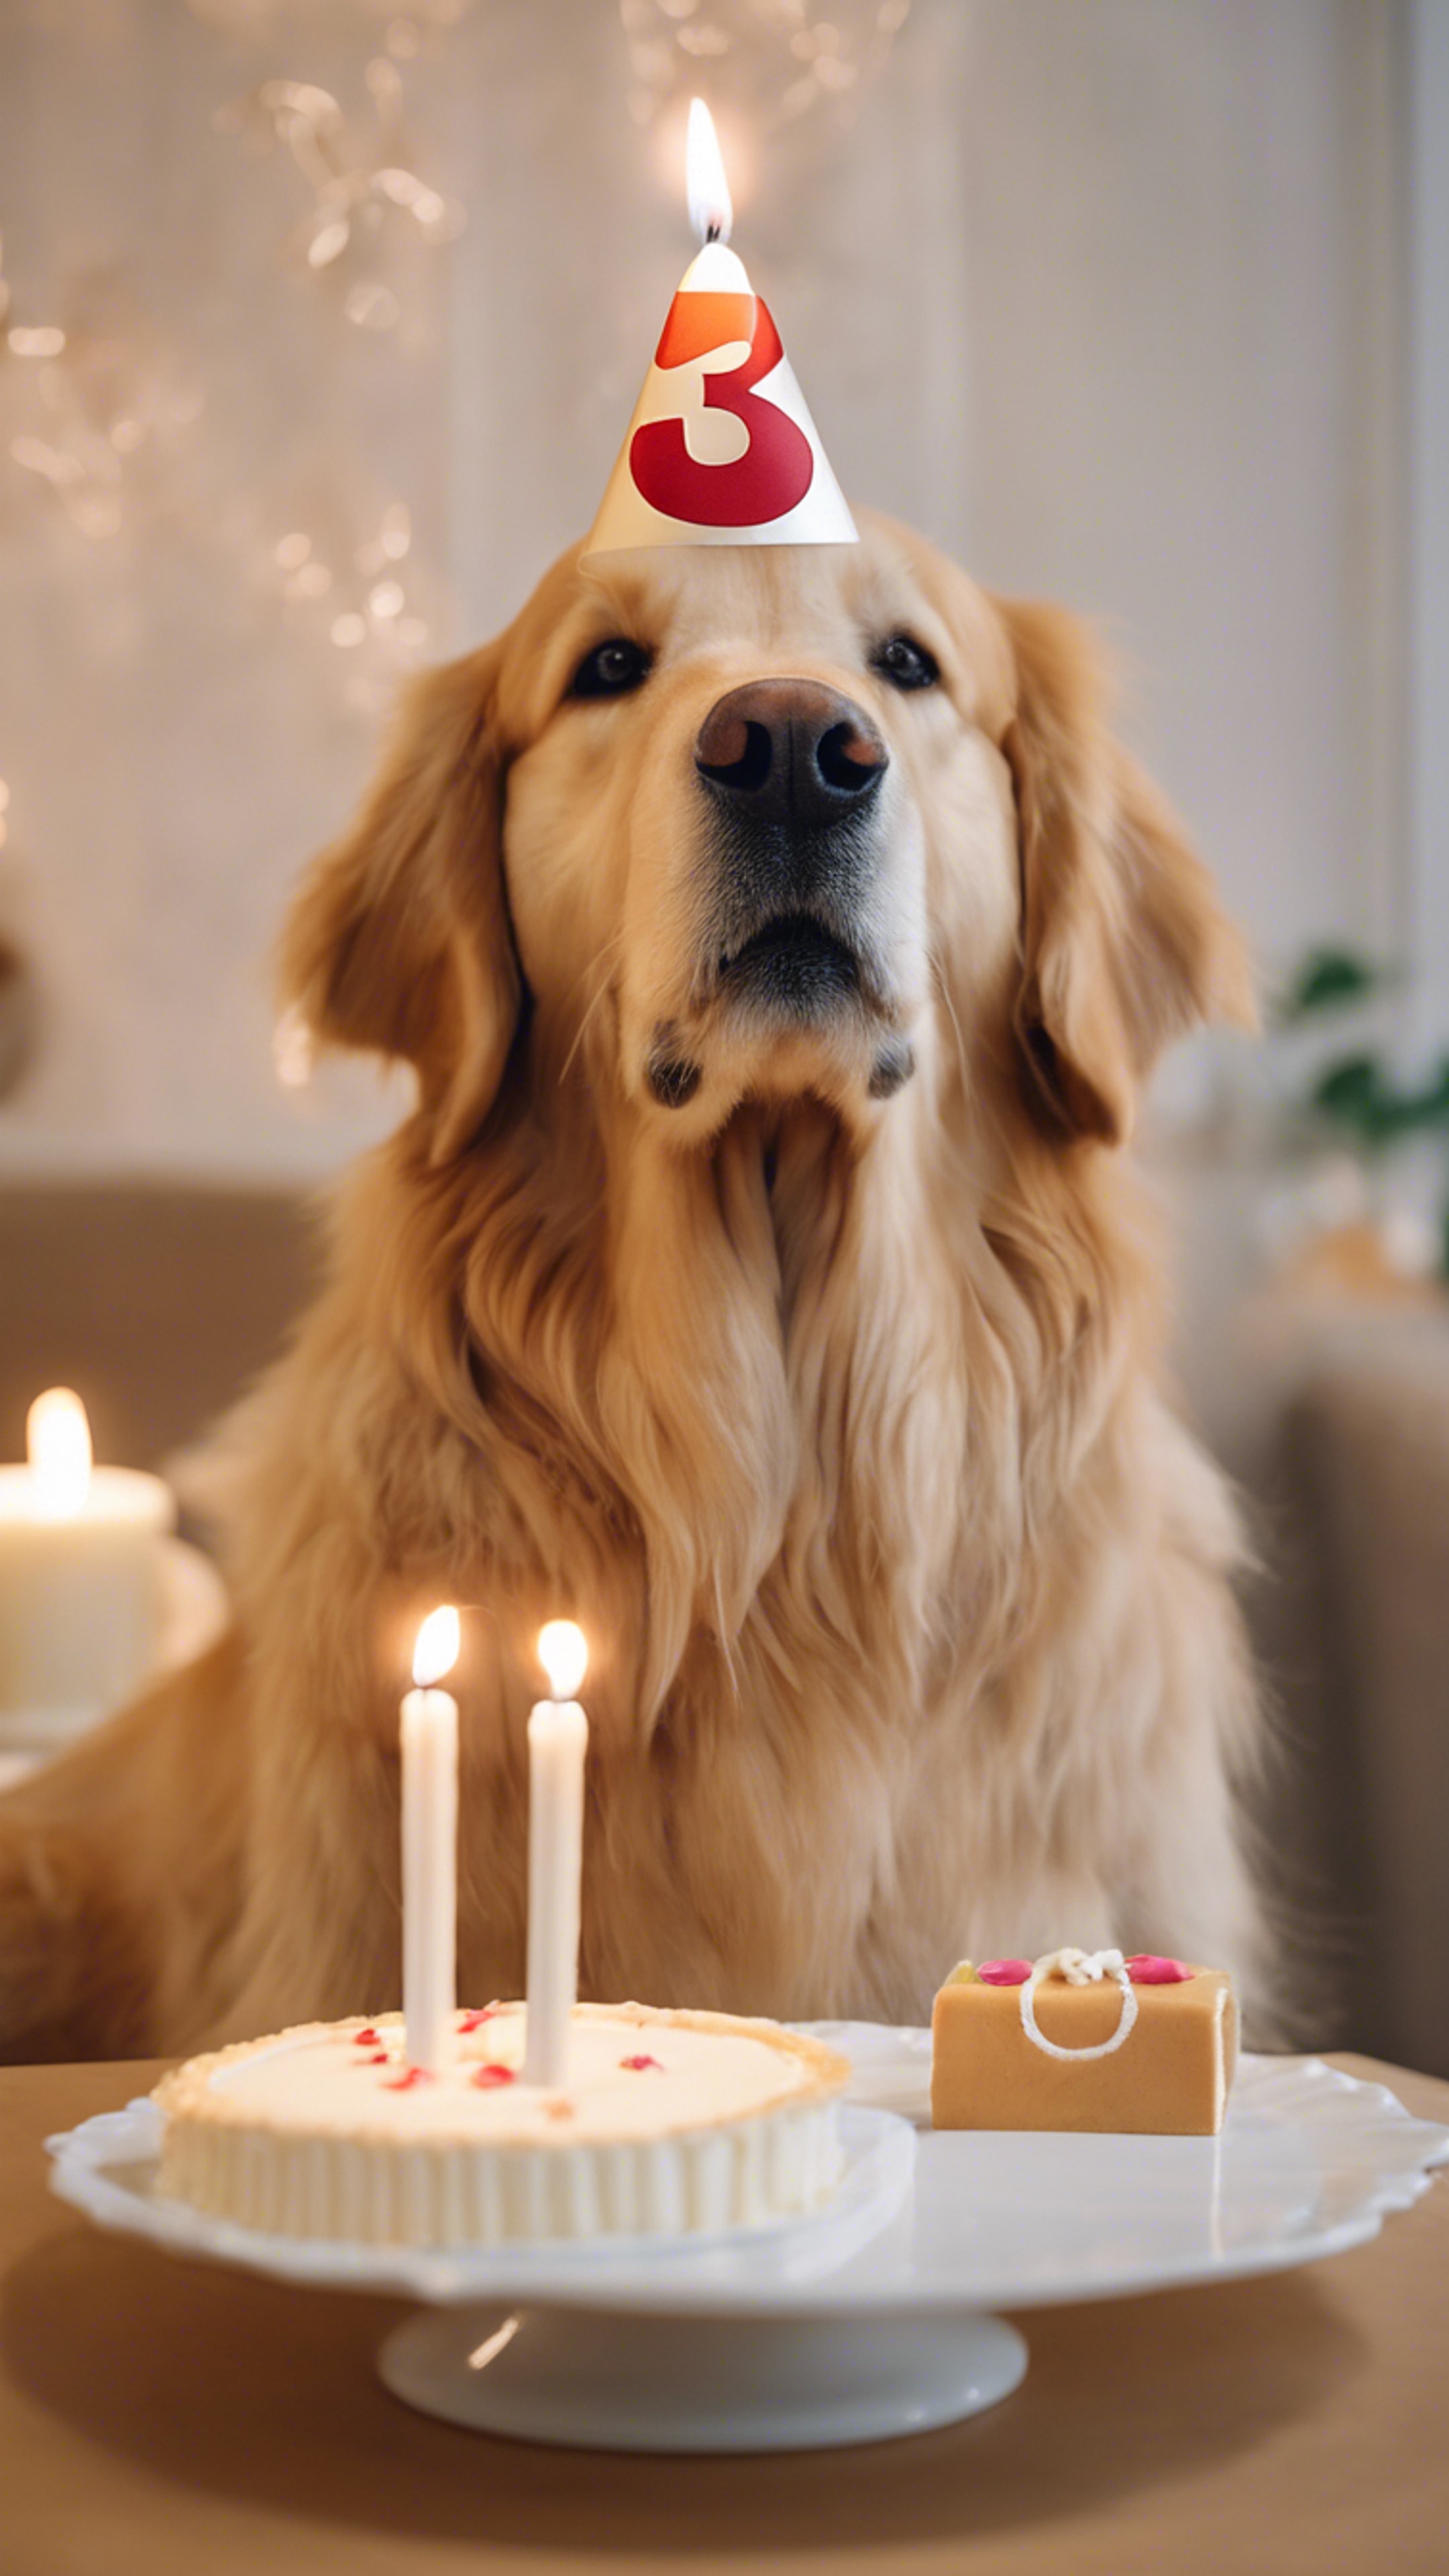 A golden retriever wearing a birthday hat, sitting in front of a numbered '3' candle on a small cake, looking eagerly at the camera. 牆紙[271fe240b95e4af1b864]